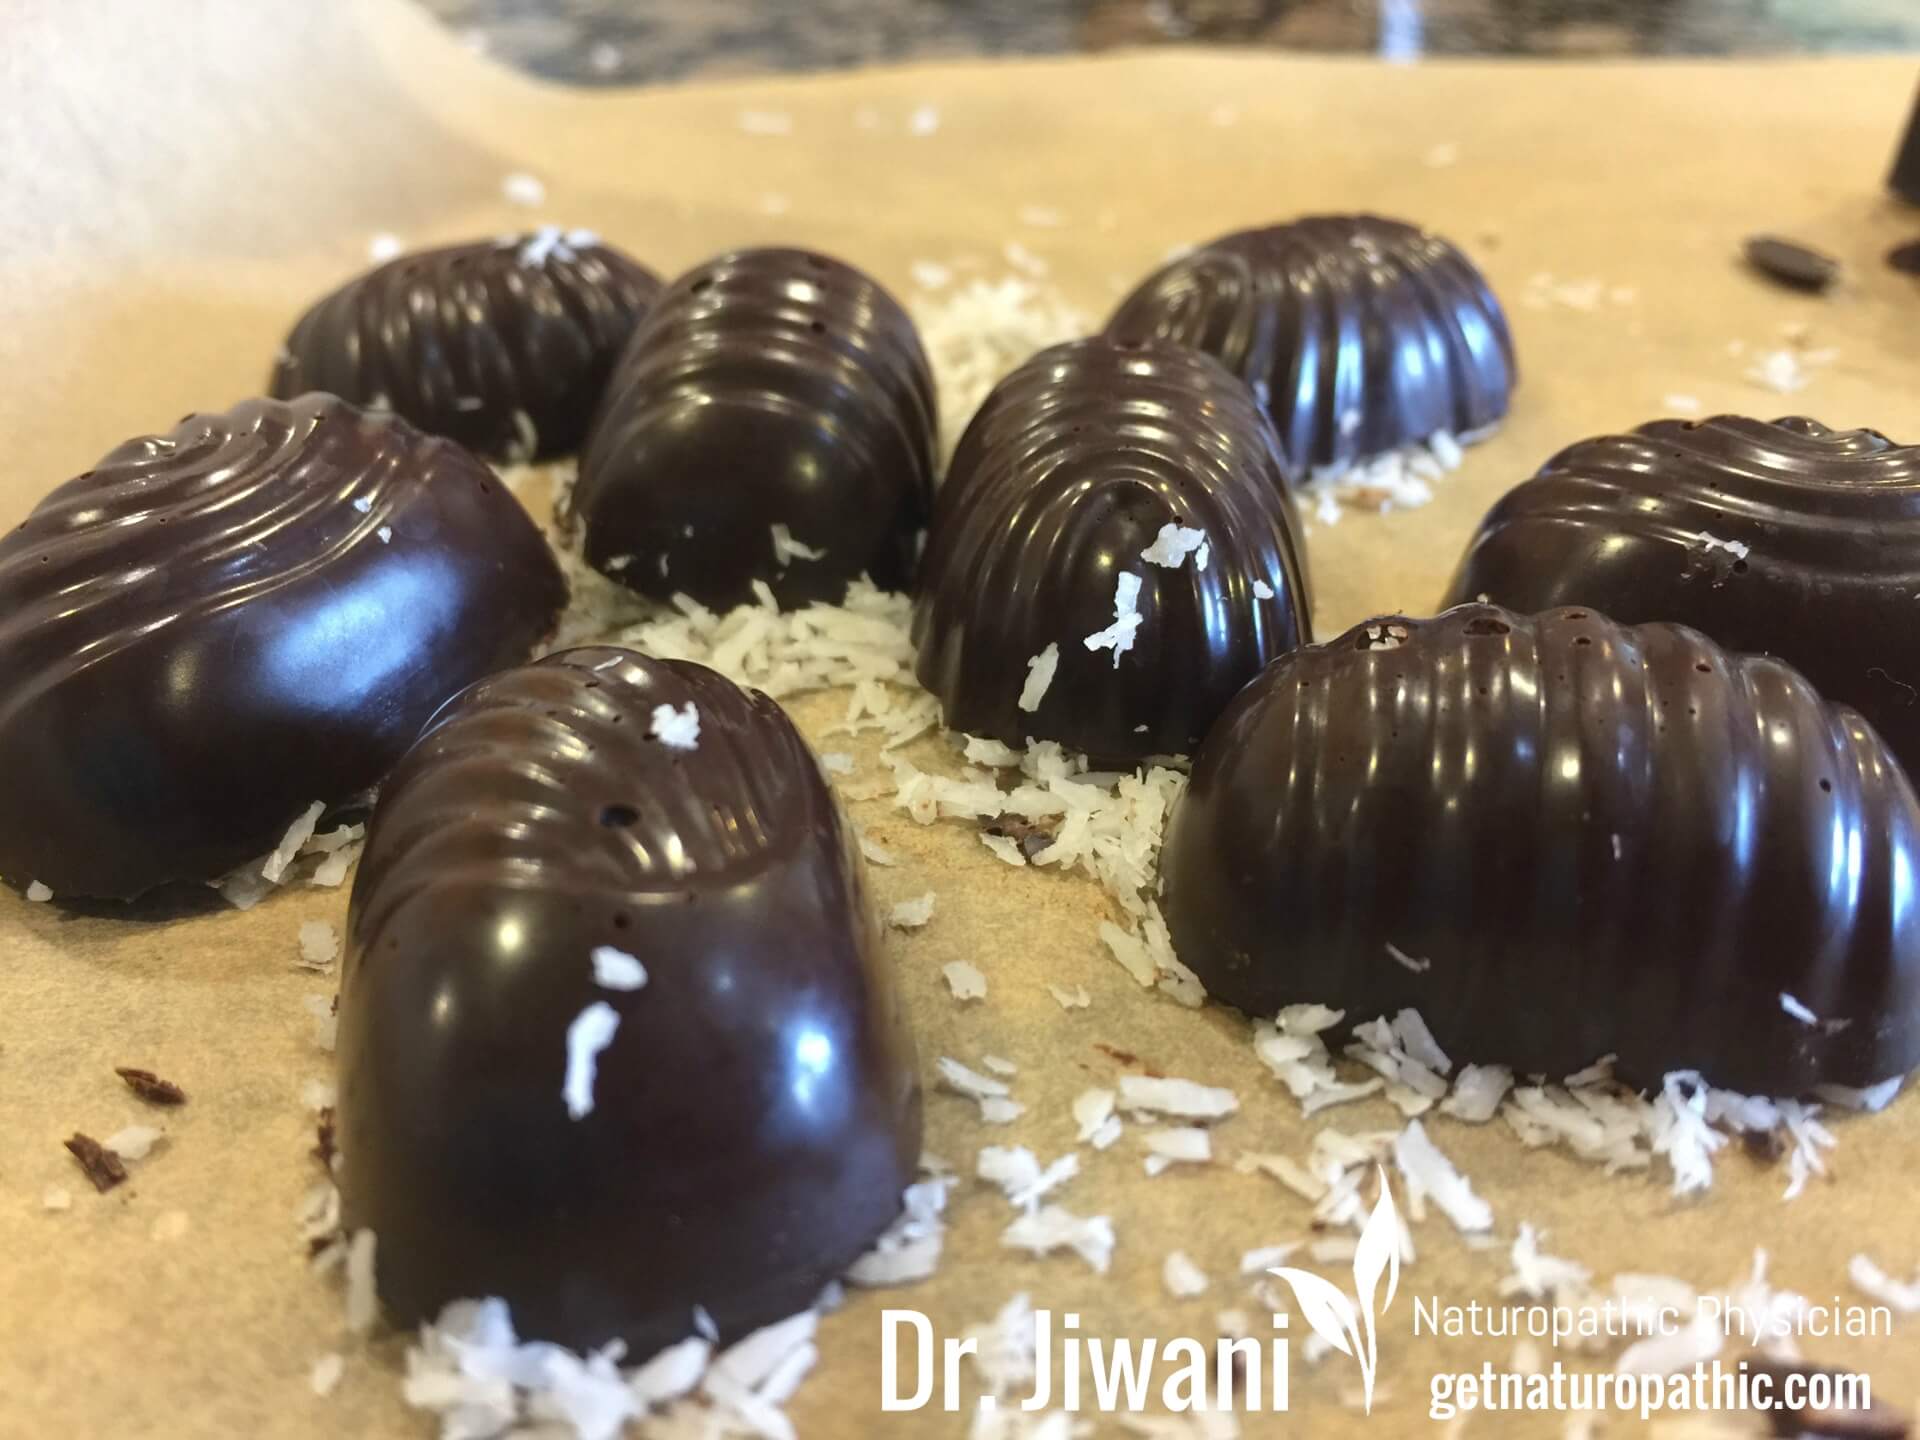 Dr. Jiwani's Dark Chocolate Low Carb Delights: Gluten-Free, Egg-Free, Dairy-Free, Soy-Free, Corn-Free, Ideal For Vegan, Paleo, Keto, Diabetic & Candida Diets | Dr. Jiwani's Naturopathic Nuggets Blog